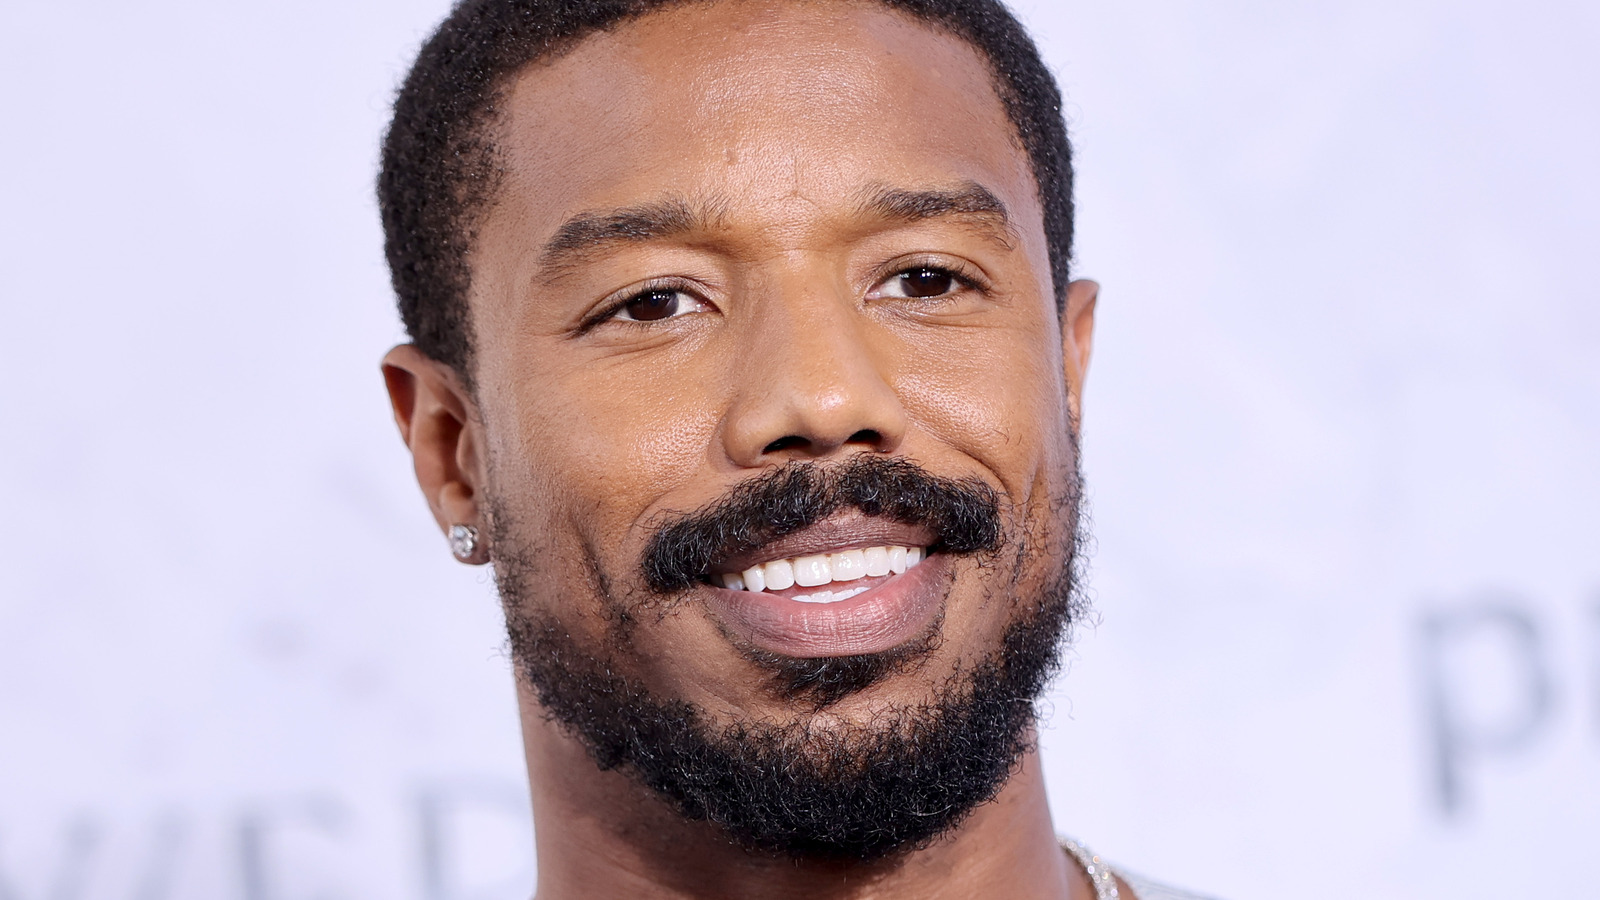 Michael B. Jordan's MBJam Returns to Raise and Funds for Lupus Research –  The Hollywood Reporter